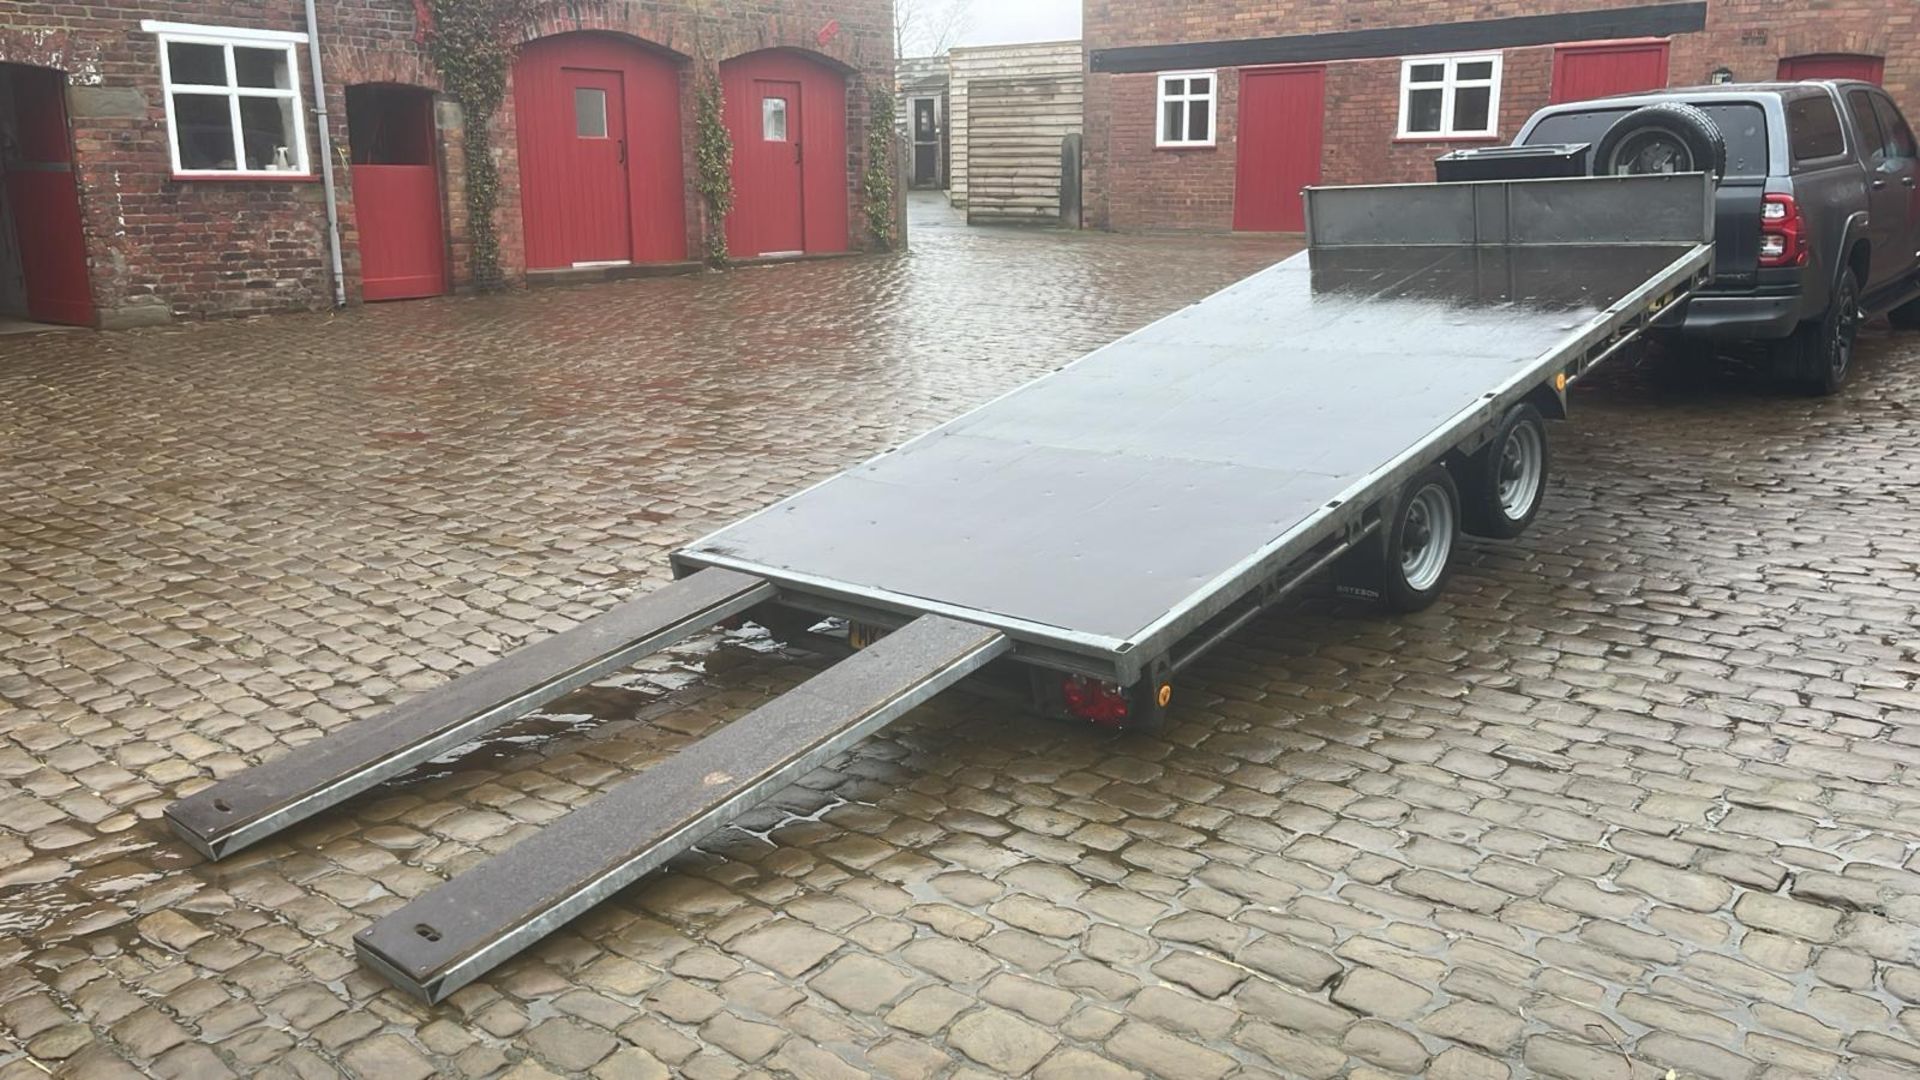 2021 BATESON 14' TWIN AXLE TILT BED TRAILER WITH RAMPS + VAT - Image 4 of 15